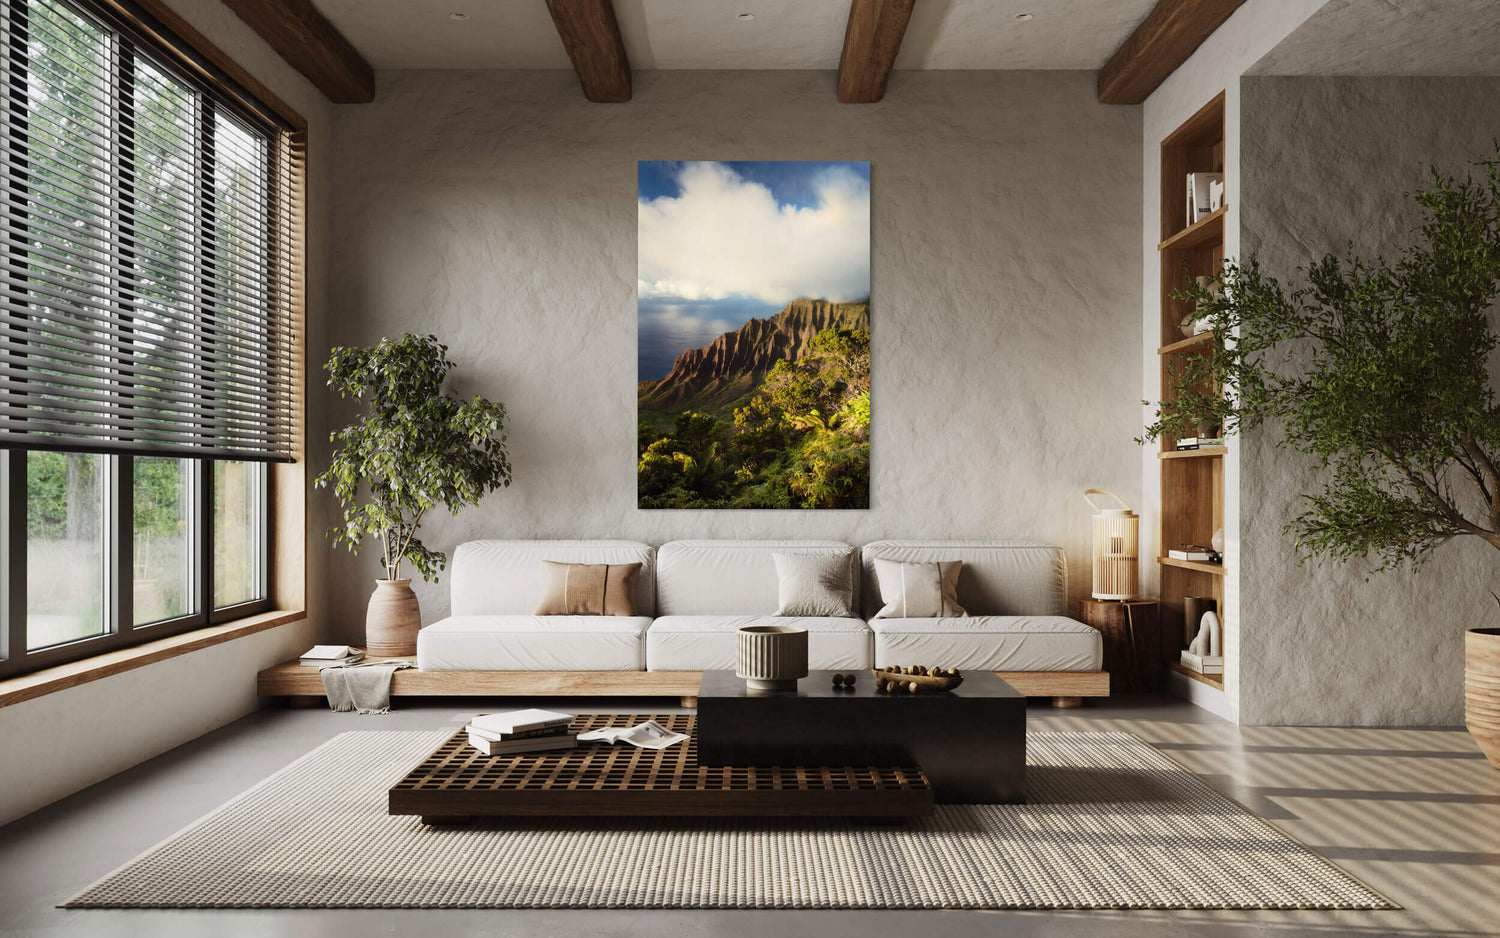 A piece of Kauai art shows the Napali Coast from Kalalau Valley Overlook hanging in a living room.